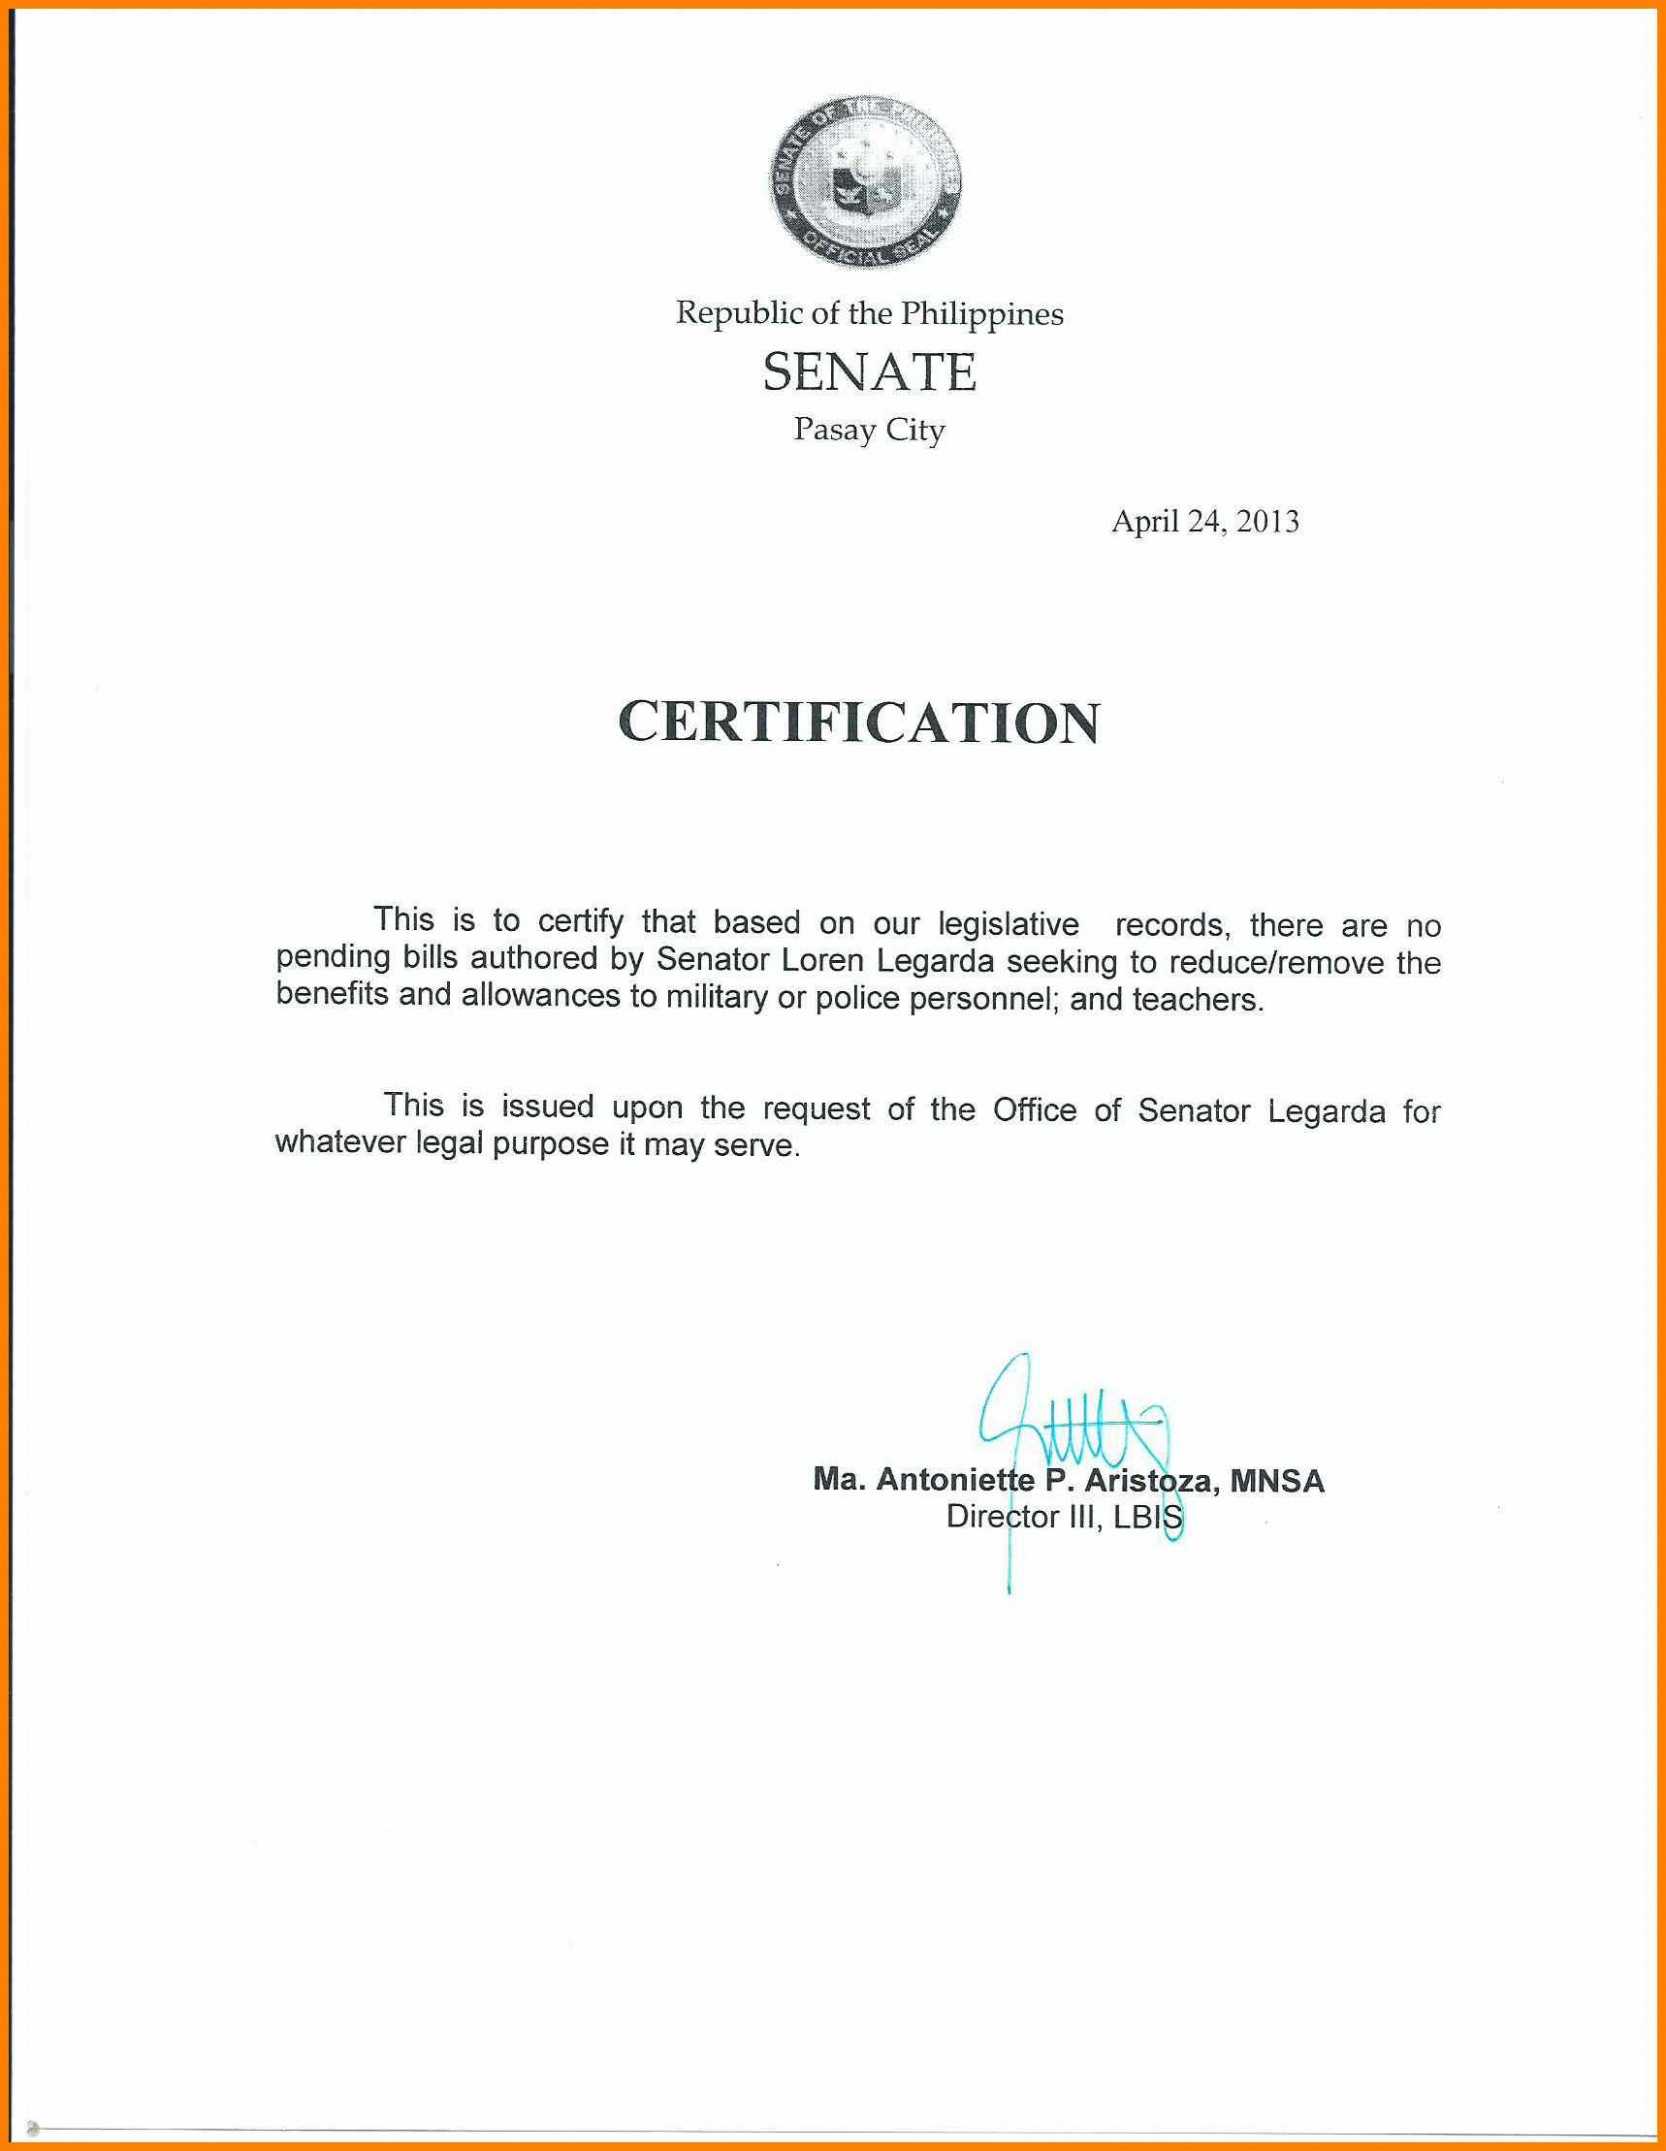 Sample Certificate Of Employment Certification Tugon Med With Regard To Sample Certificate Employment Template